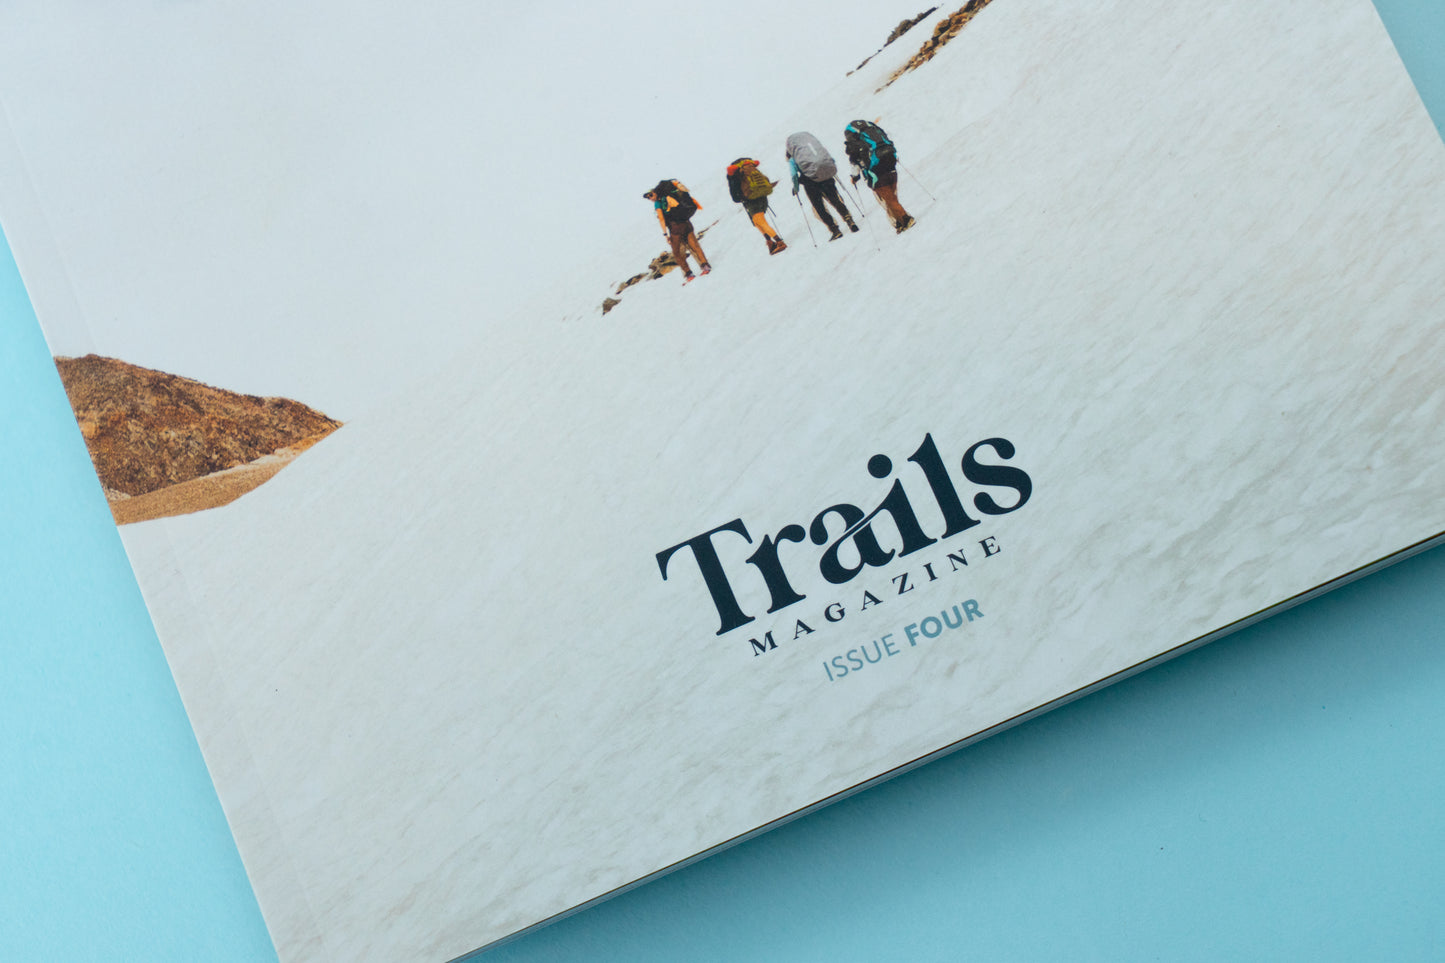 The bottom half of a magazine is over a blue background. The cover displays four women in hiking gear off in the distance, following one another on a hike. The text "Trails Magazine - Issue Four" is centered at the bottom.